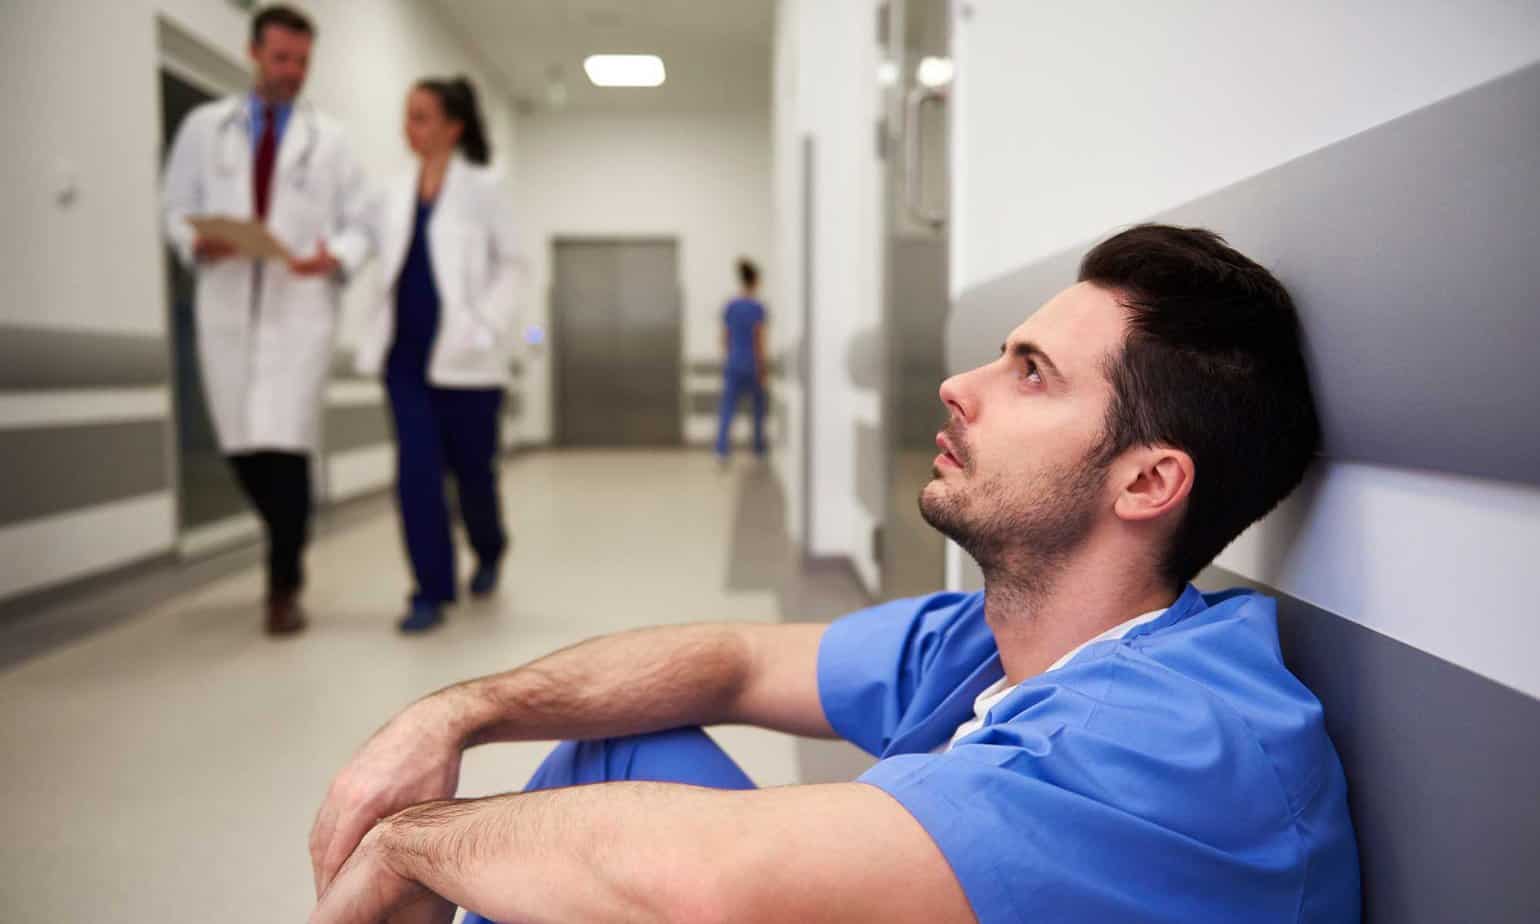 A stressed out doctor sitting on the ground in a hospital hallway.